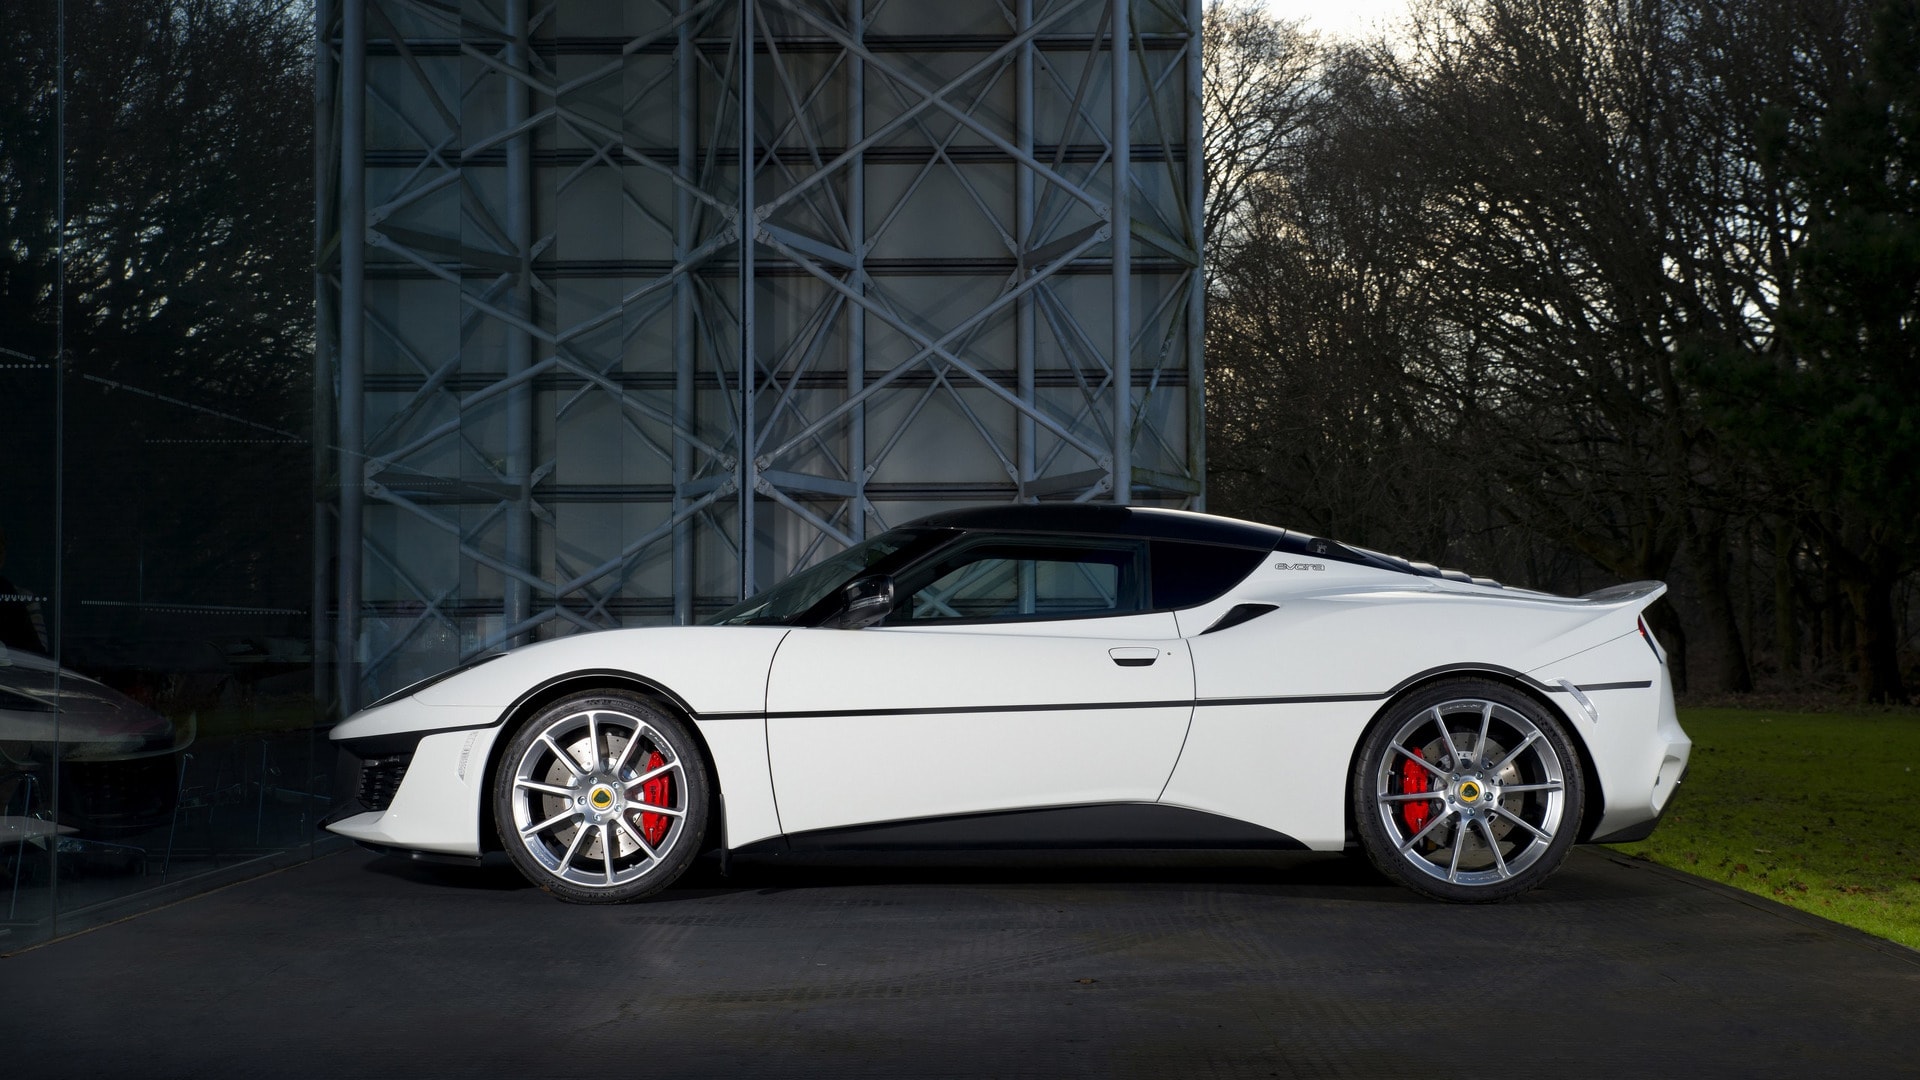 This Lotus Evora Is A Tribute To James Bond’s Esprit From